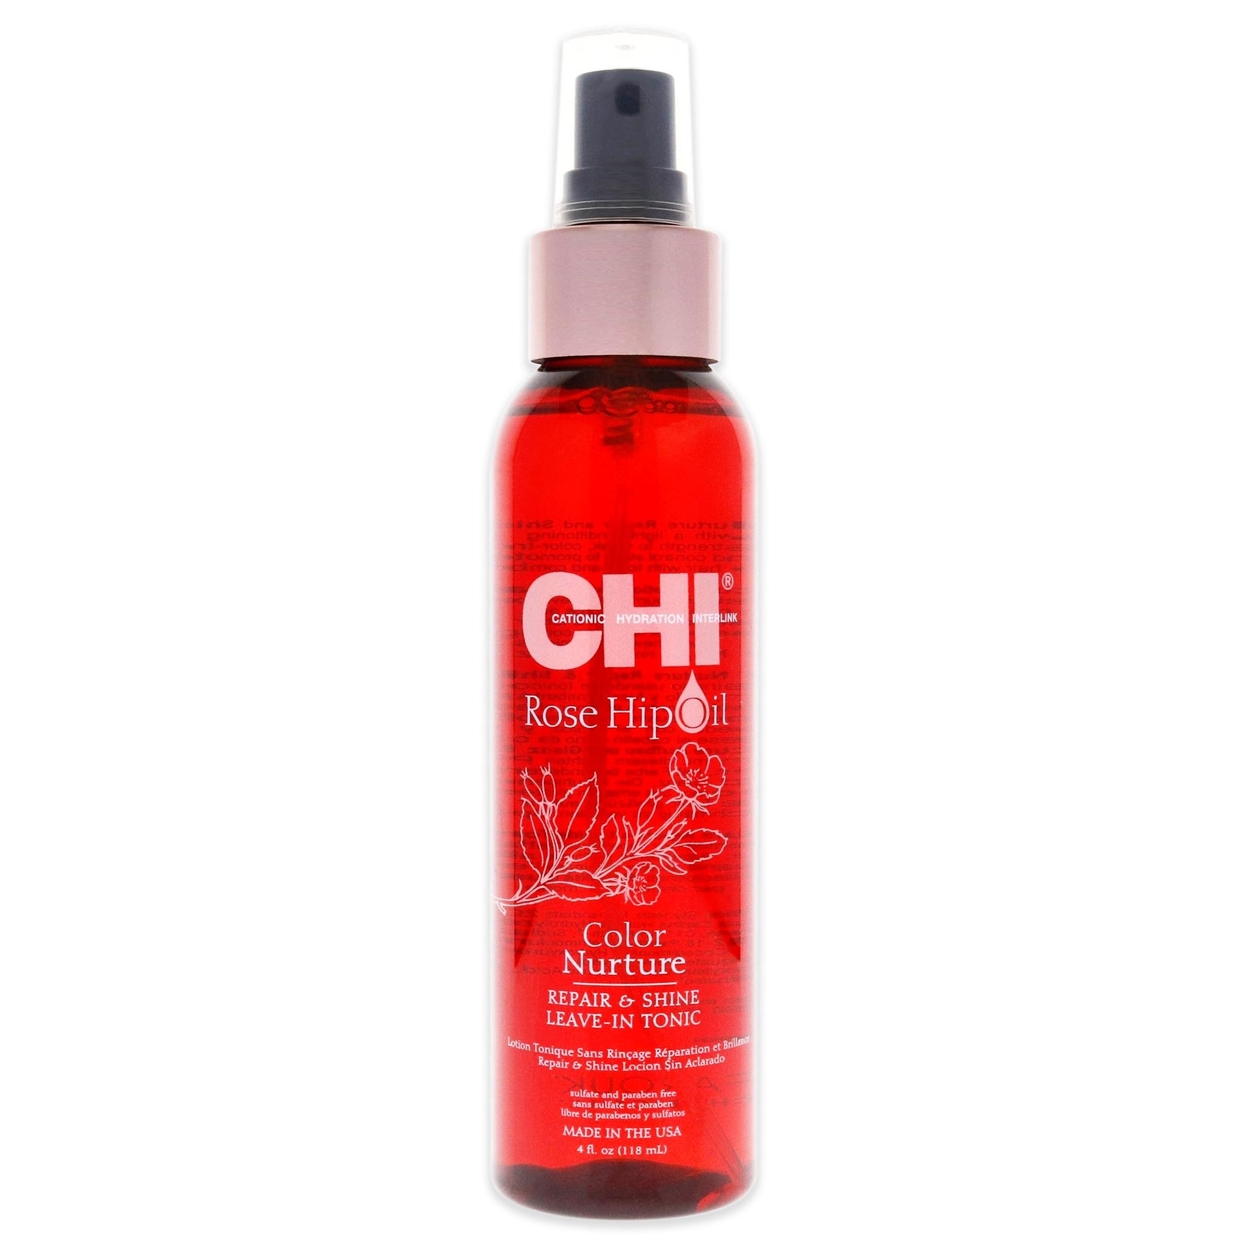 CHI Rose Hip Oil Color Nurture Repair And Shine Leave-In Tonic Hair Spray 4 Oz